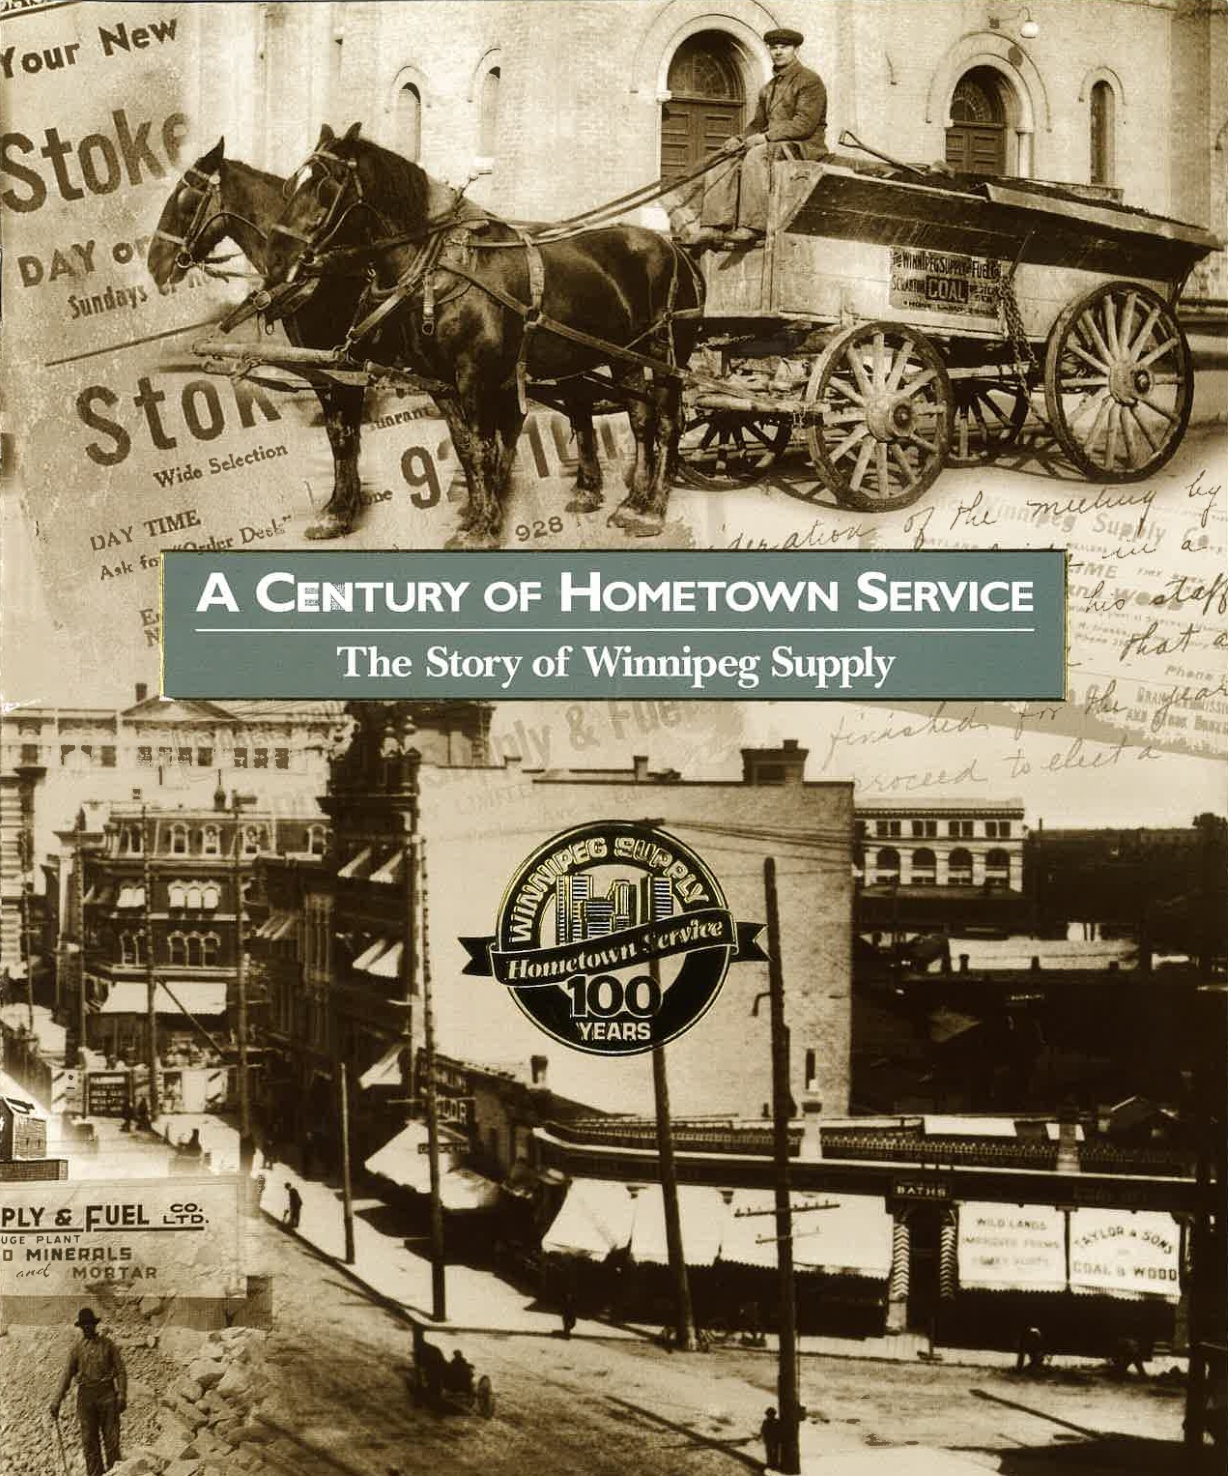 The cover of the booklet A Century of Hometown Service